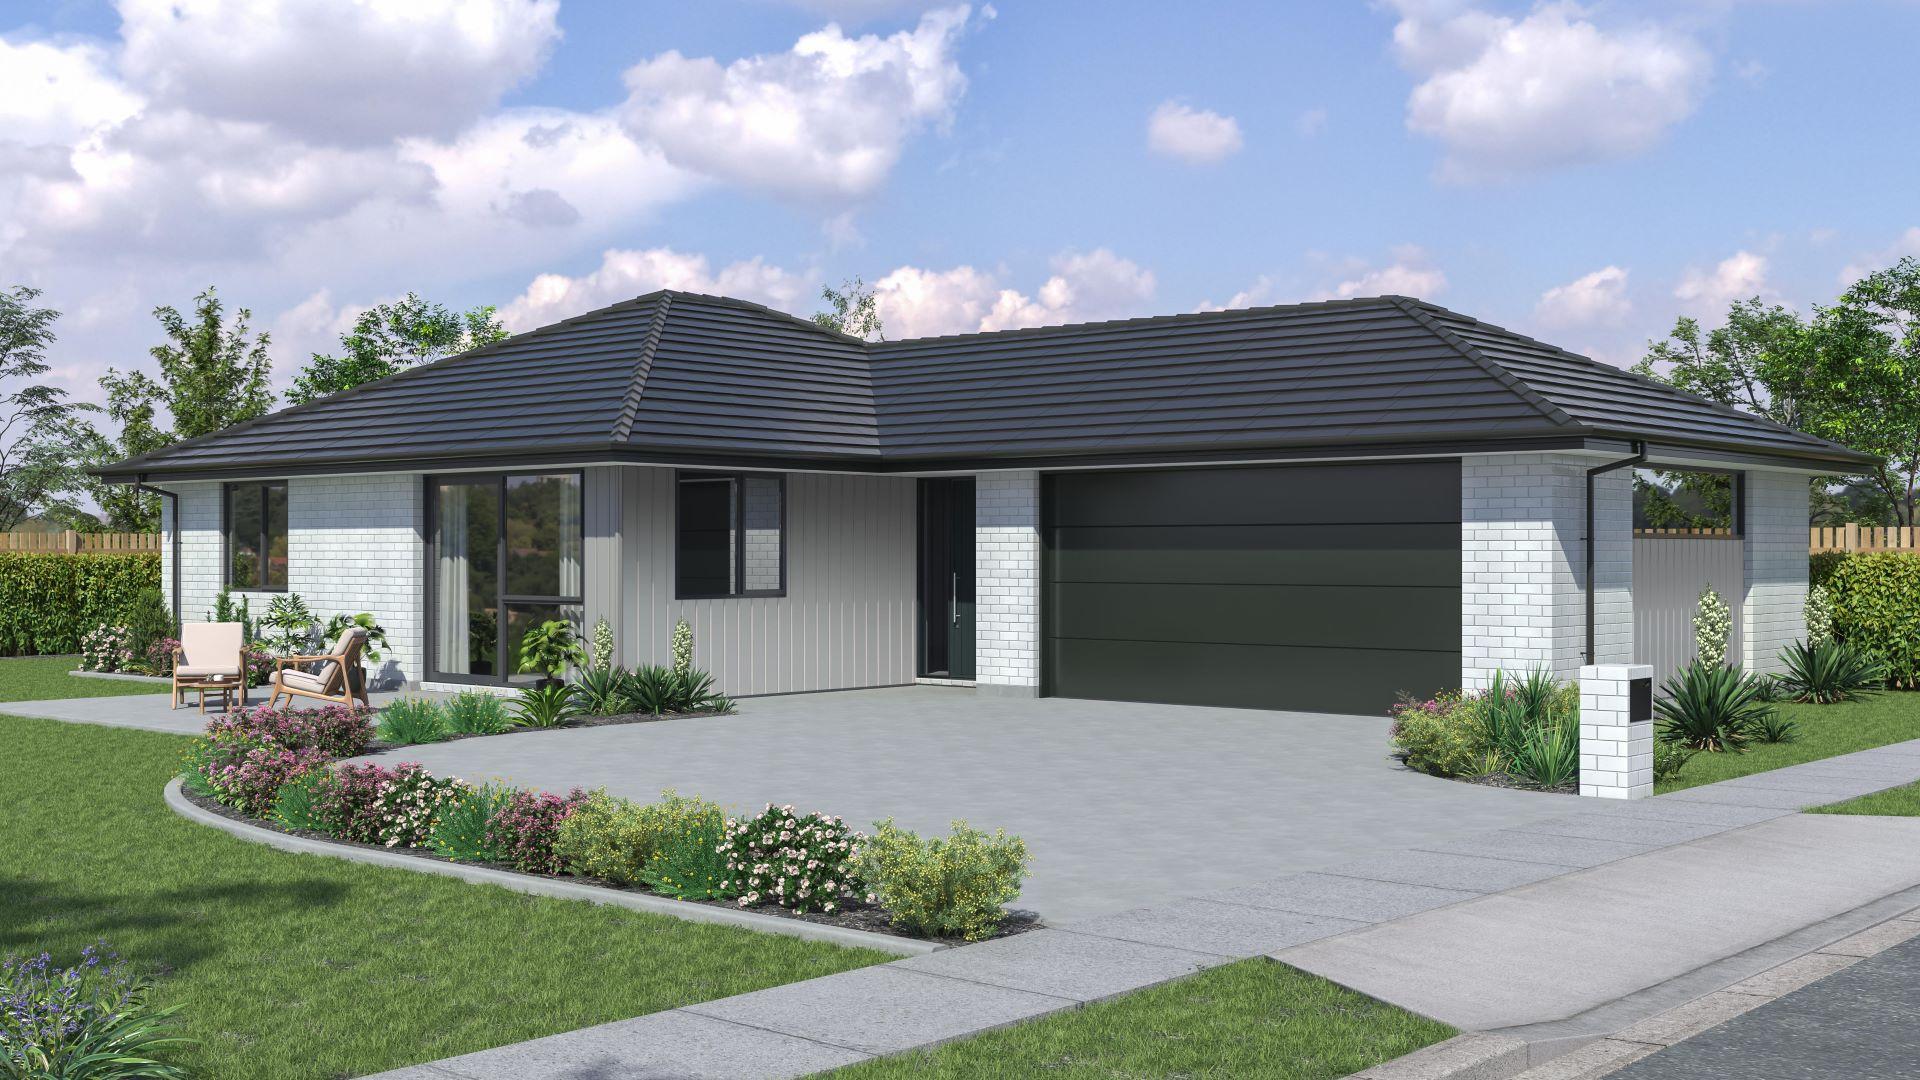 Under construction now: Great Value, 4 Bed Home image, index 0